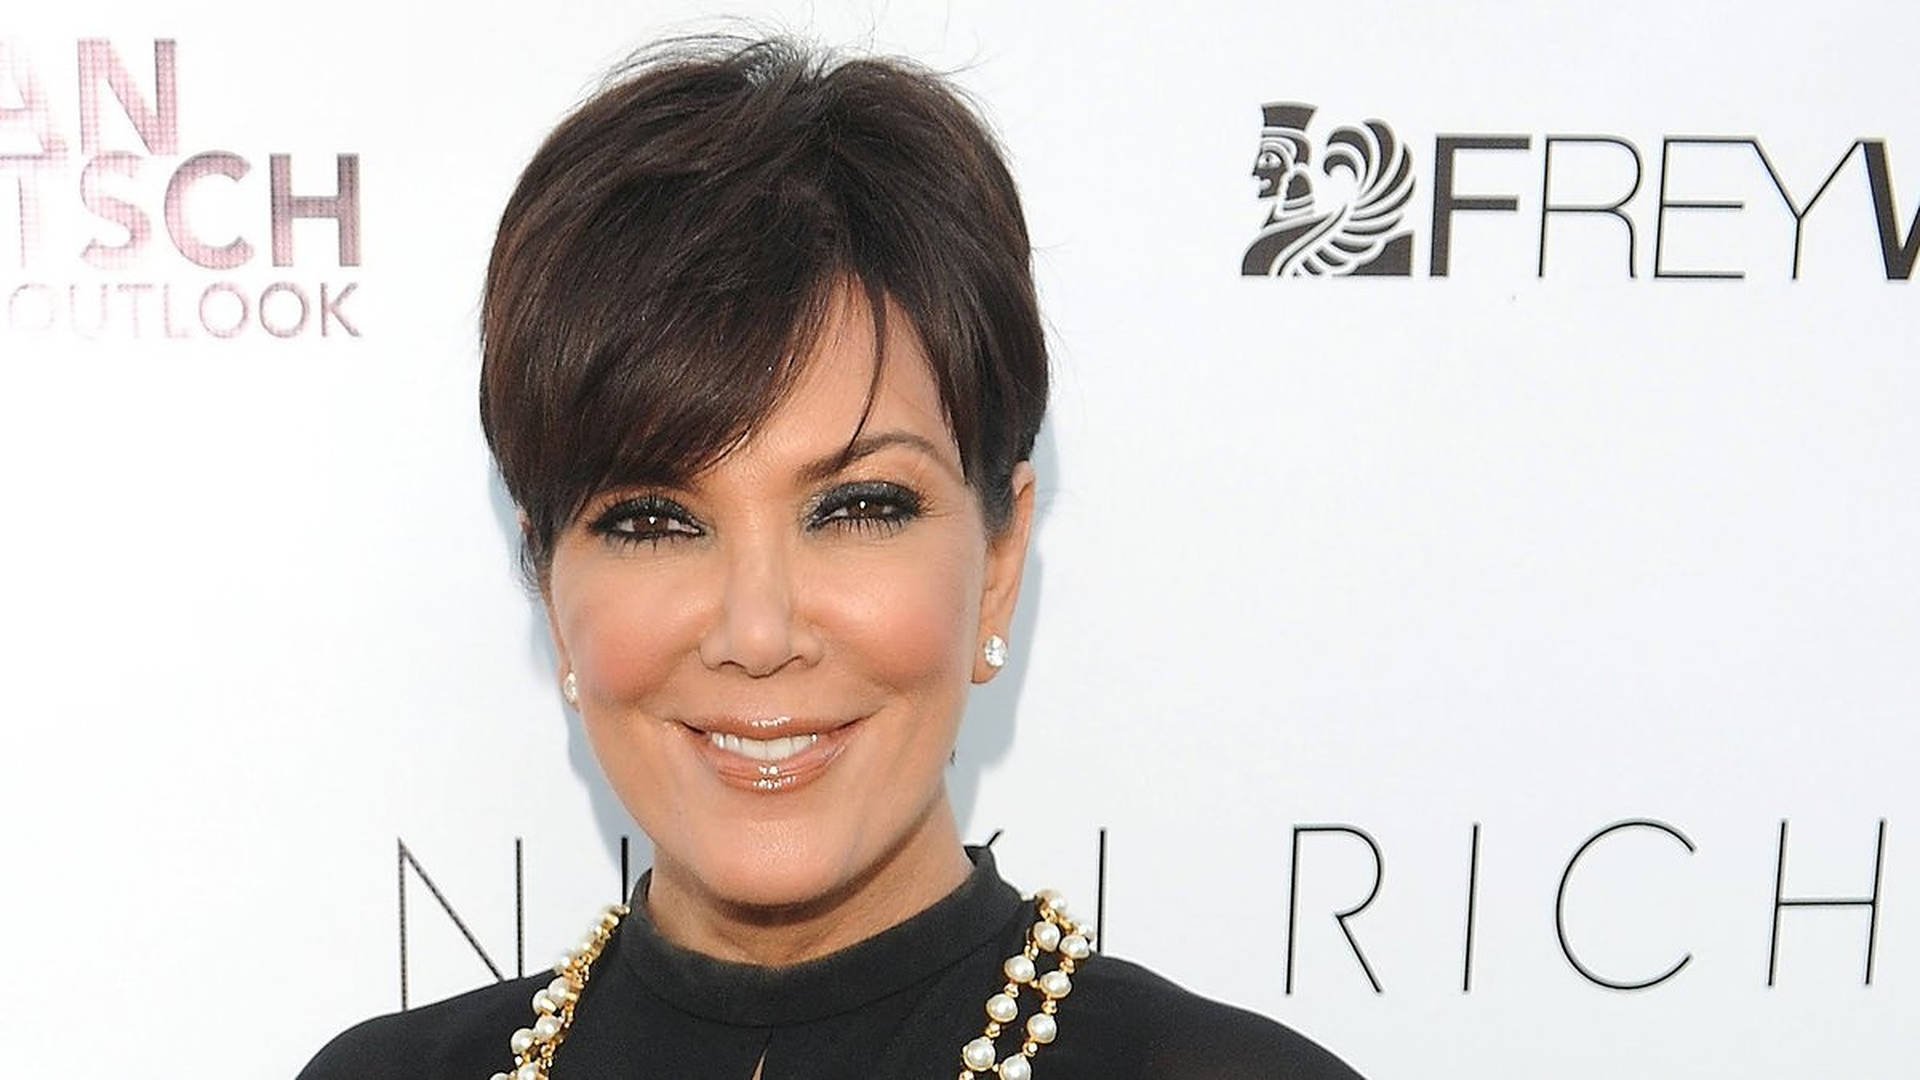 Kris Jenner With Pearls Wallpaper